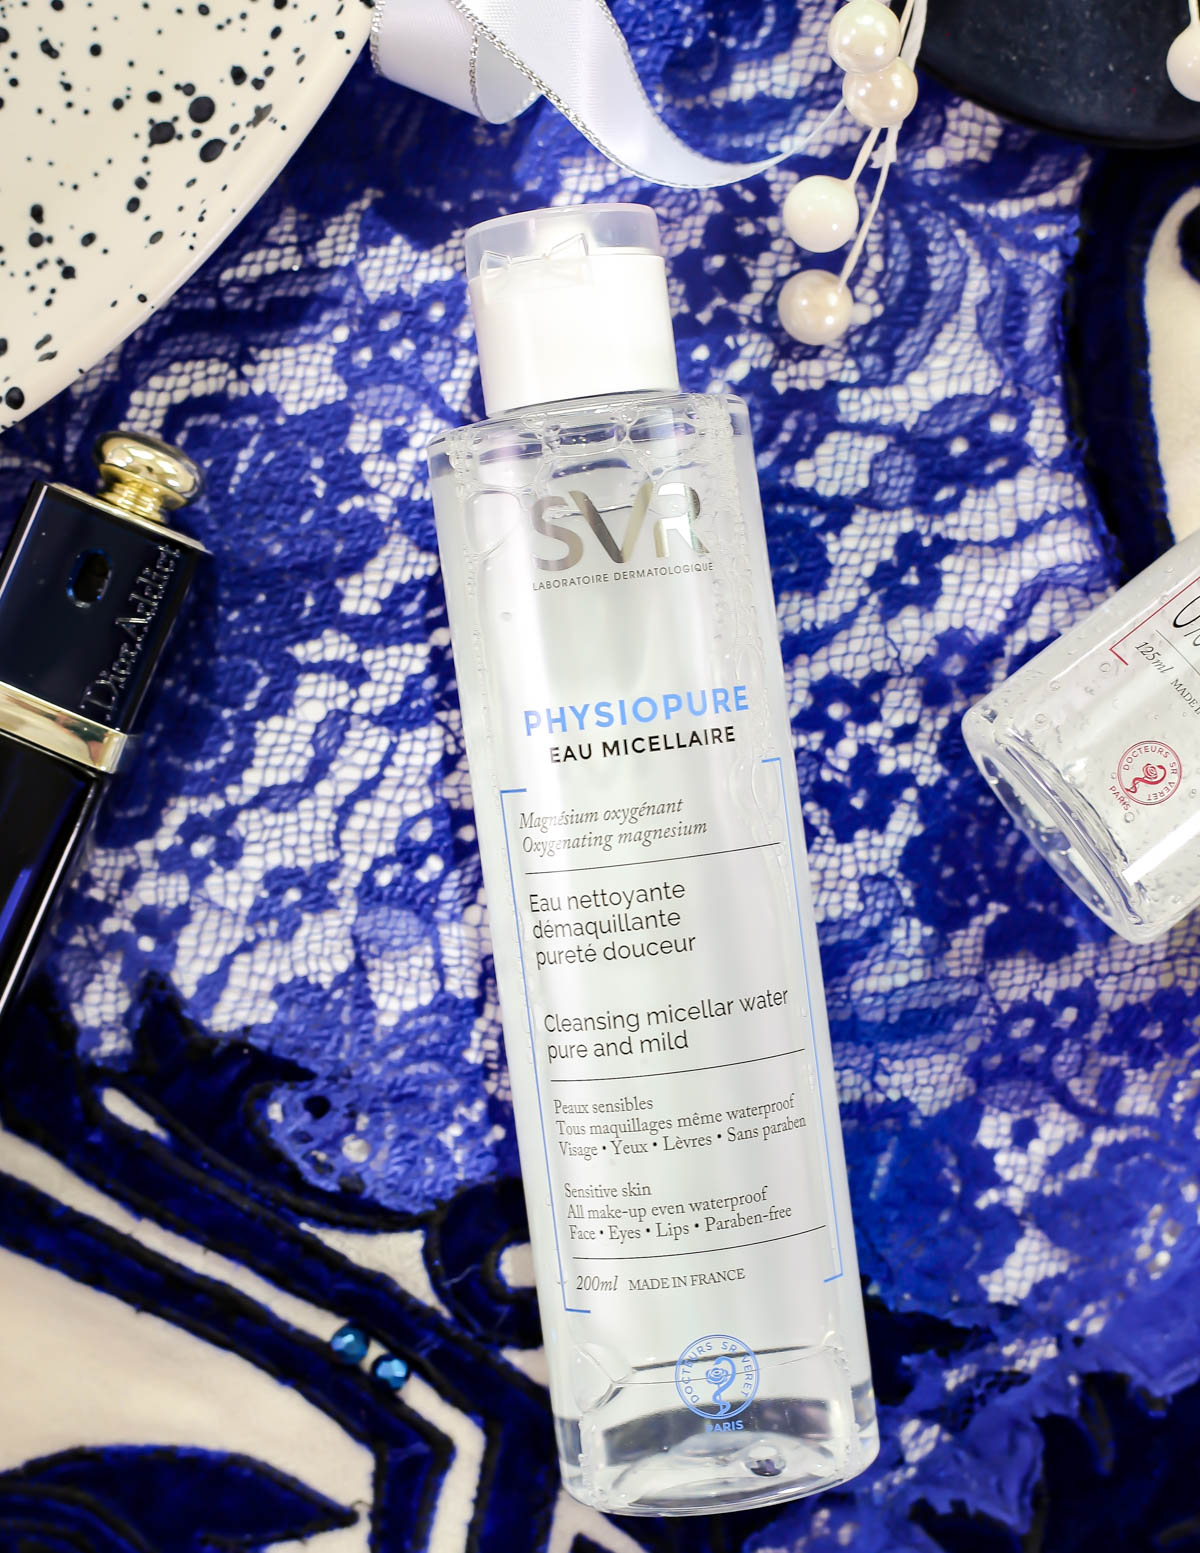 SVR Laboratoires | The French Pharmacy Brand For Every Skincare Need feat SVR Physiopure Eau Micellaire in with blue scarf styling